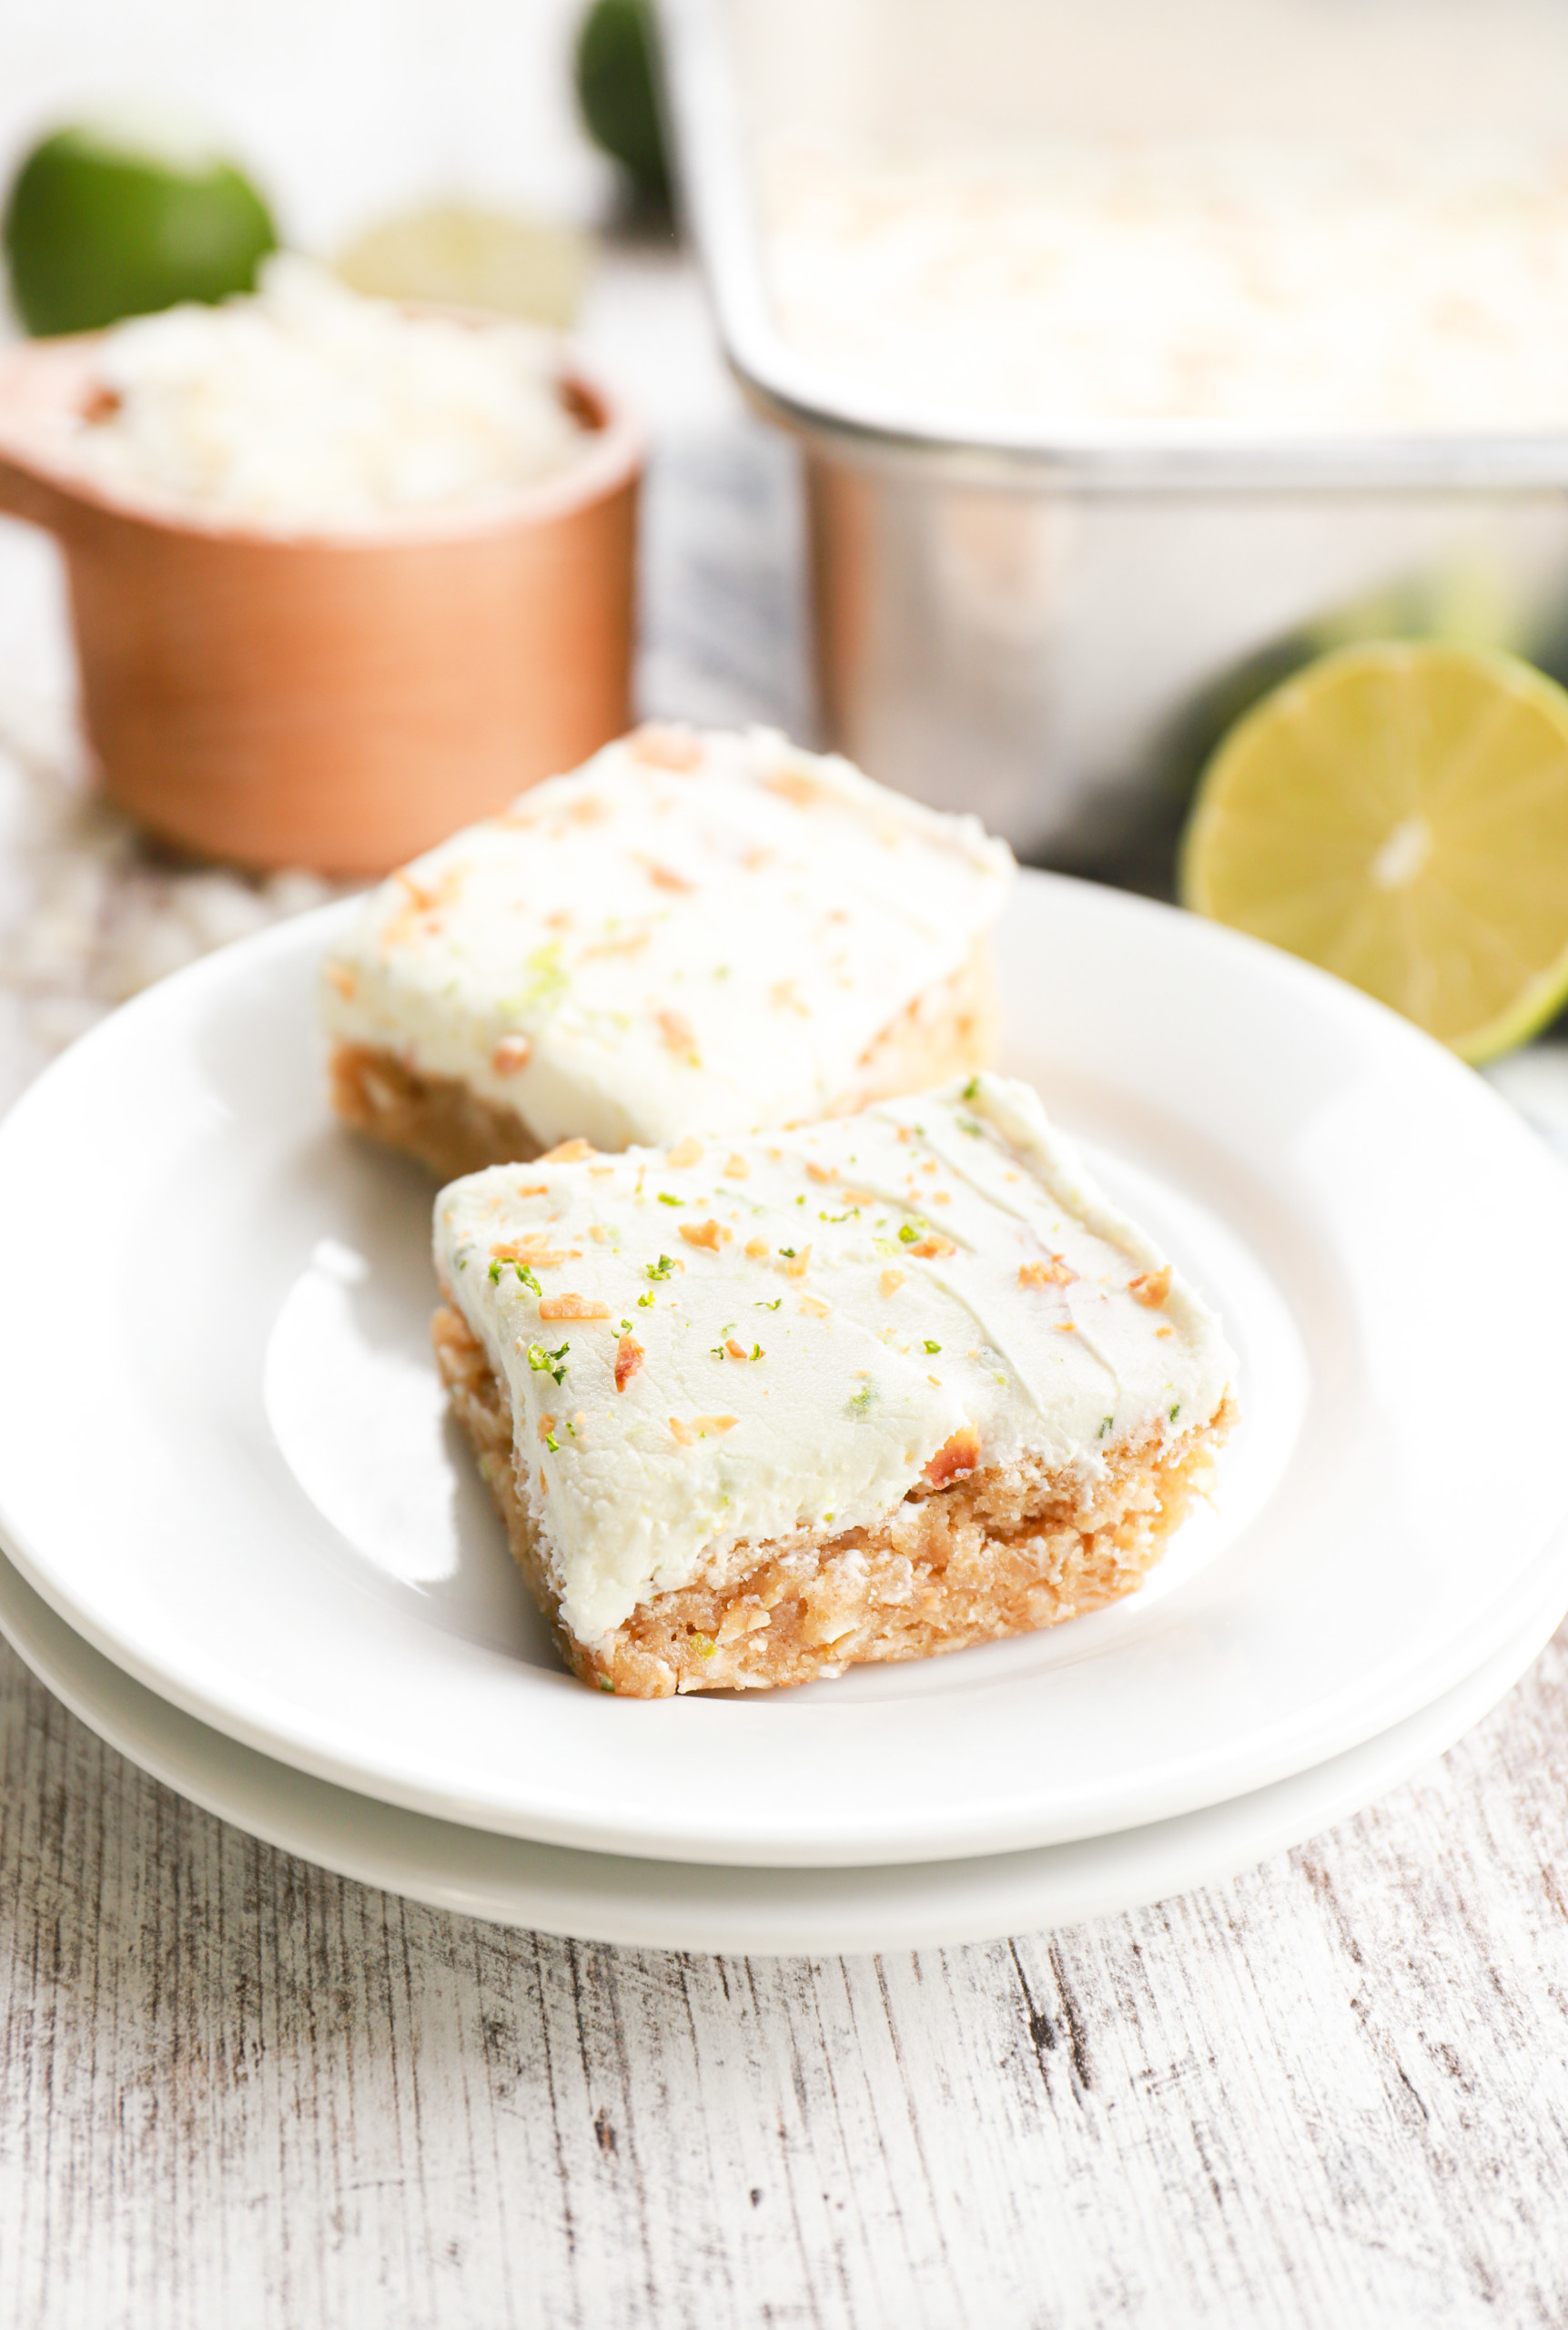 Two lime frosted coconut oat bars on a small white plate with the baking dish with the remainder of the bars in the background.